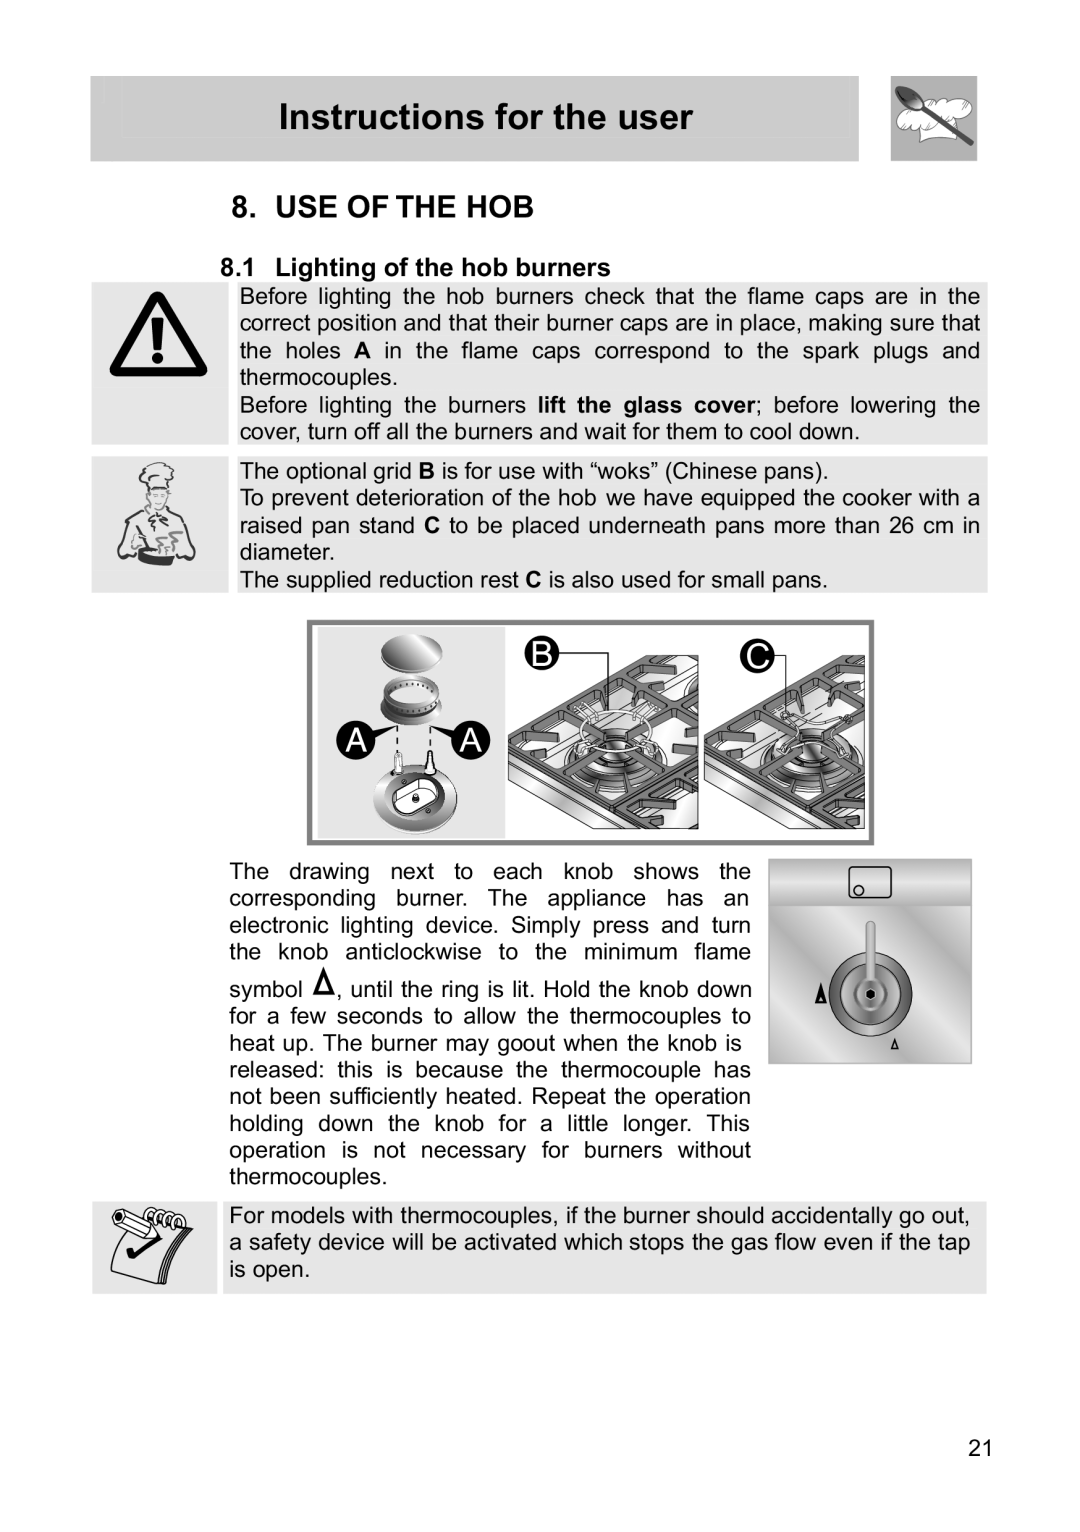 Smeg FS61MFXLP, FS60WHNG, FS60XNG manual Use Of The Hob, Lighting of the hob burners, Instructions for the user 